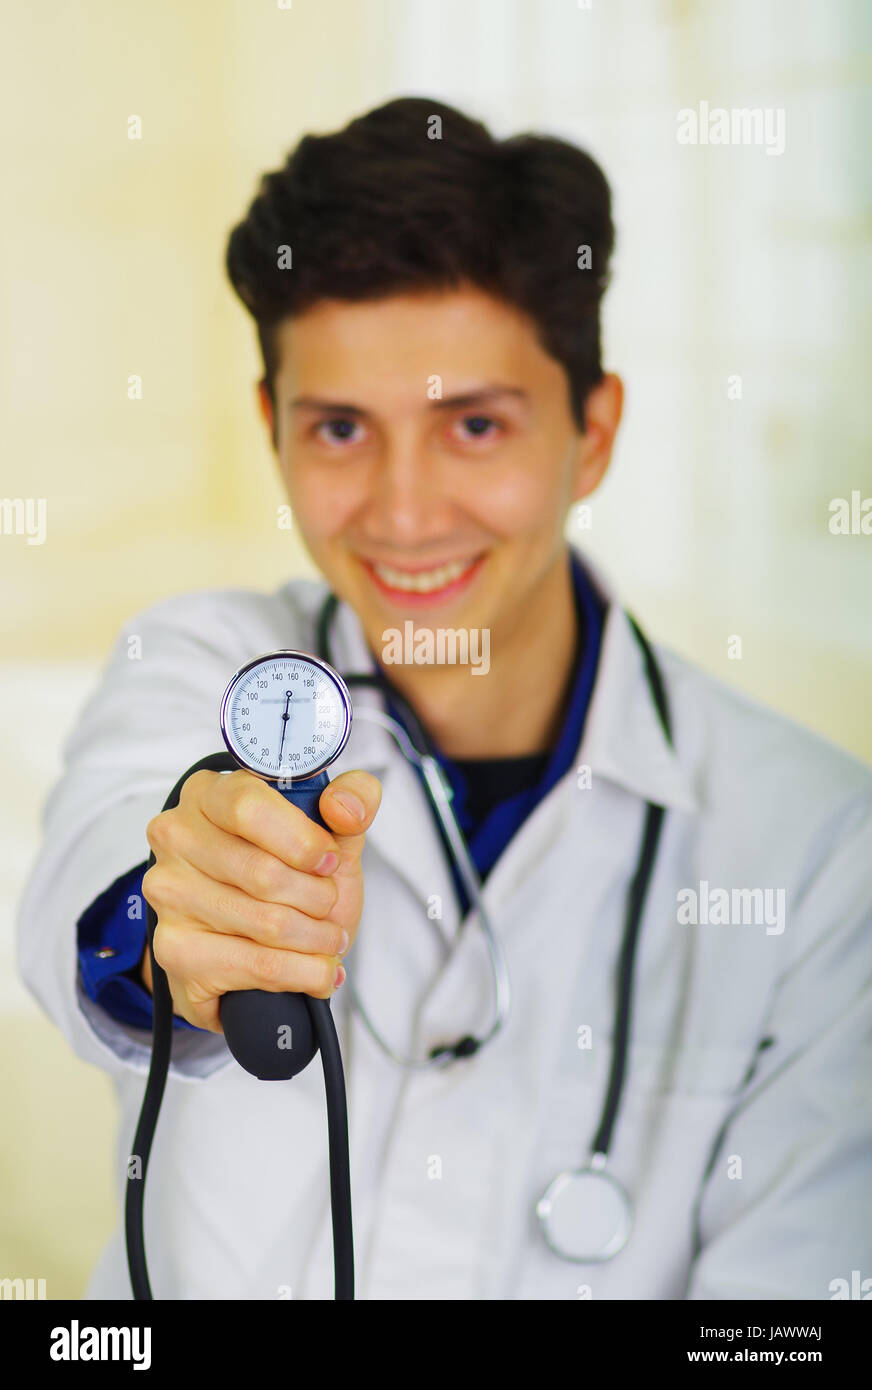 Handsome smiling young doctor with stethoscope around his neck, holdig a Tensiometer in his hand, in a doctor consulting room background Stock Photo